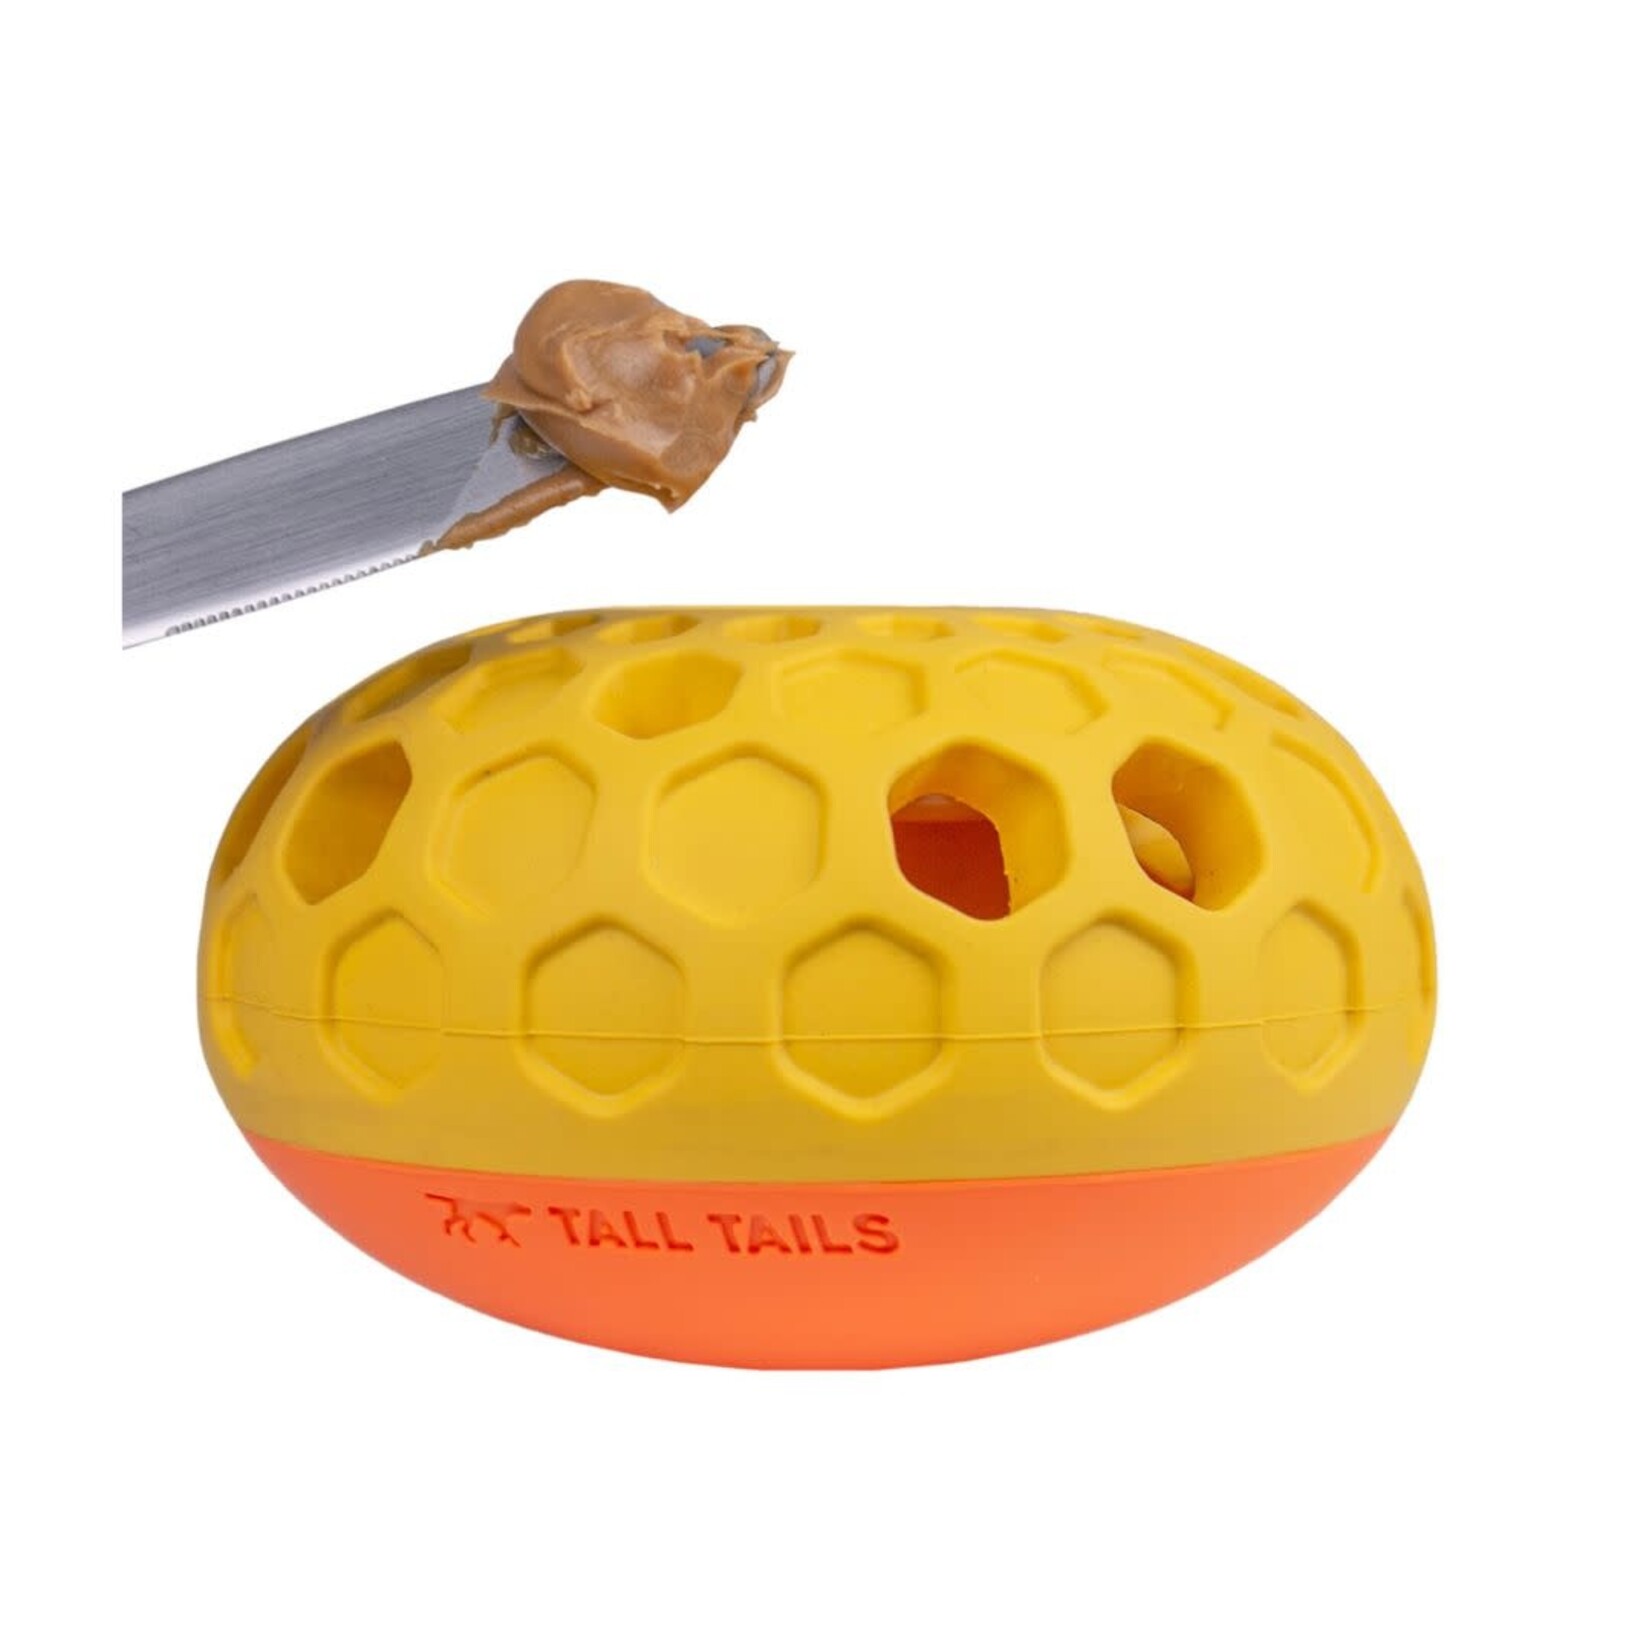 Tall Tails Tall Tails Natural Rubber Bee Hive Reward Dog Toy